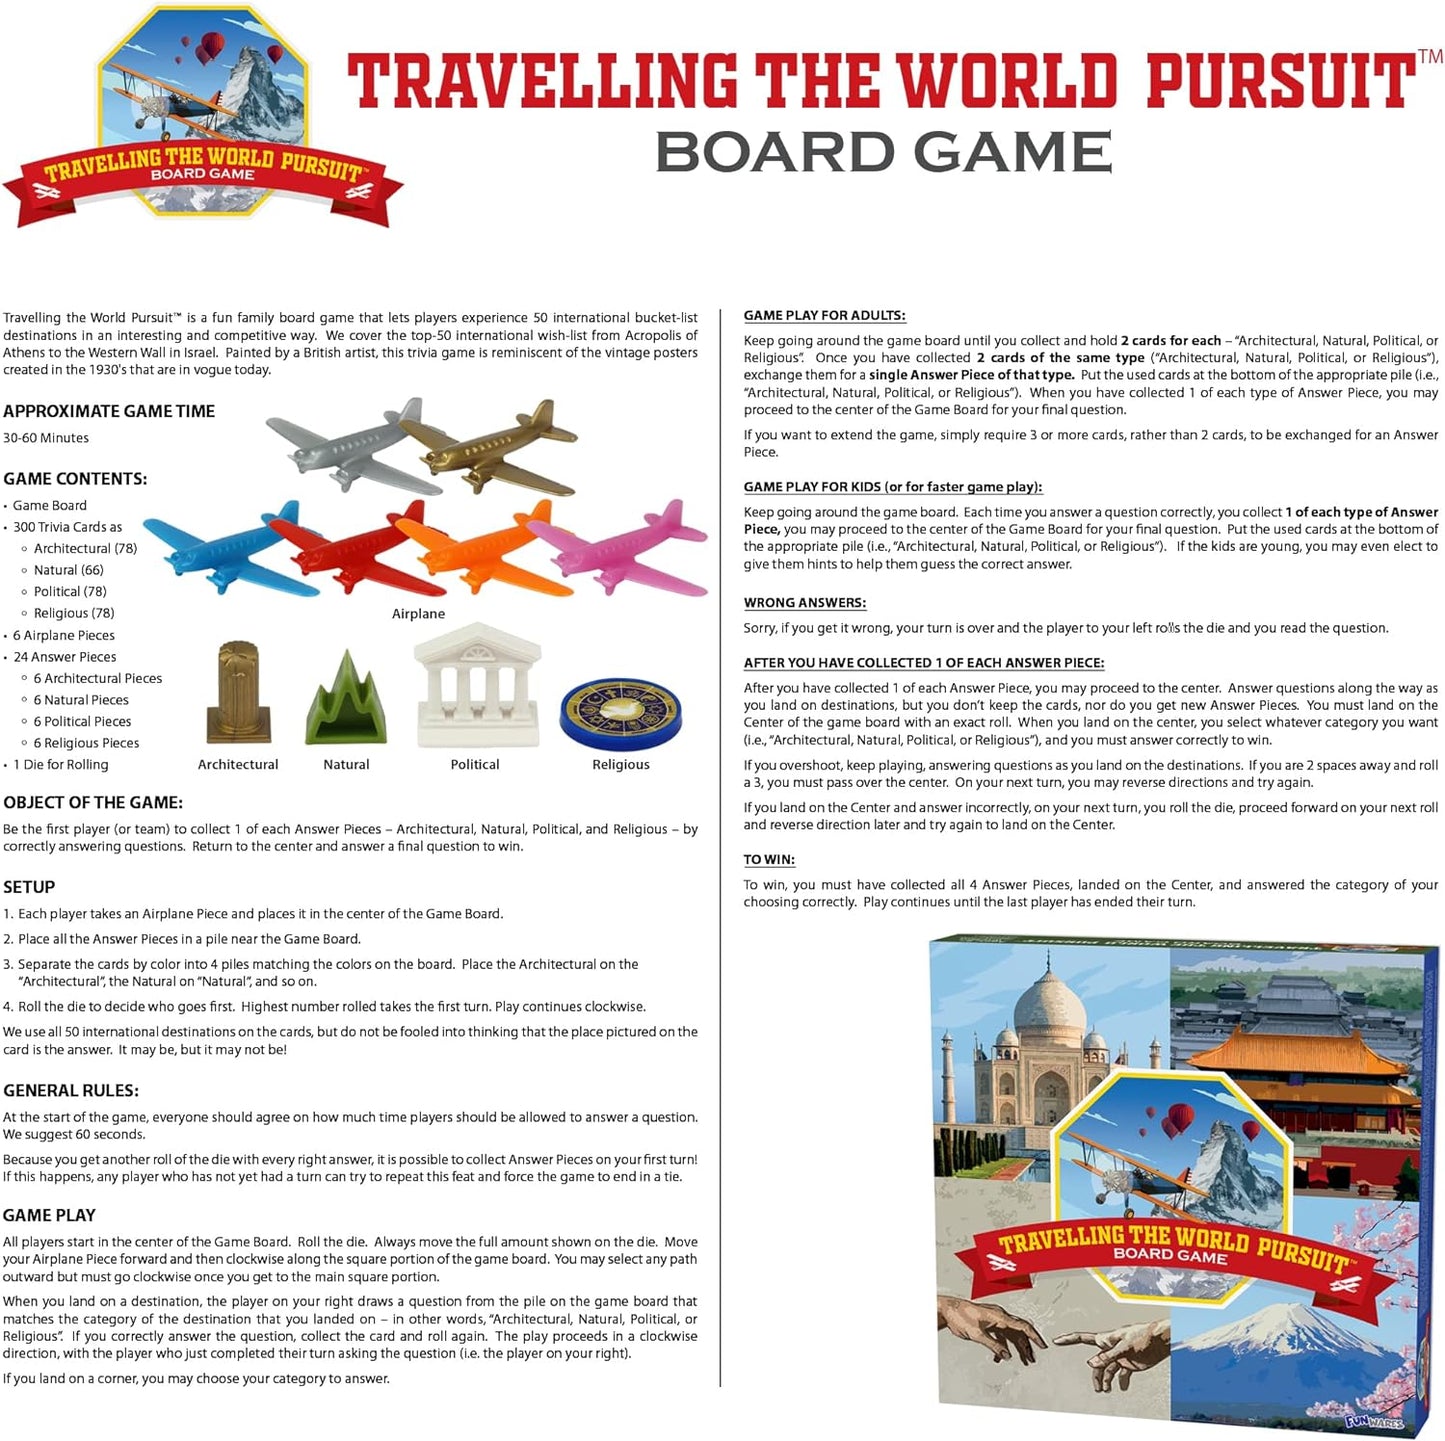 TRAVELLING THE WORLD PURSUIT BOARD GAME